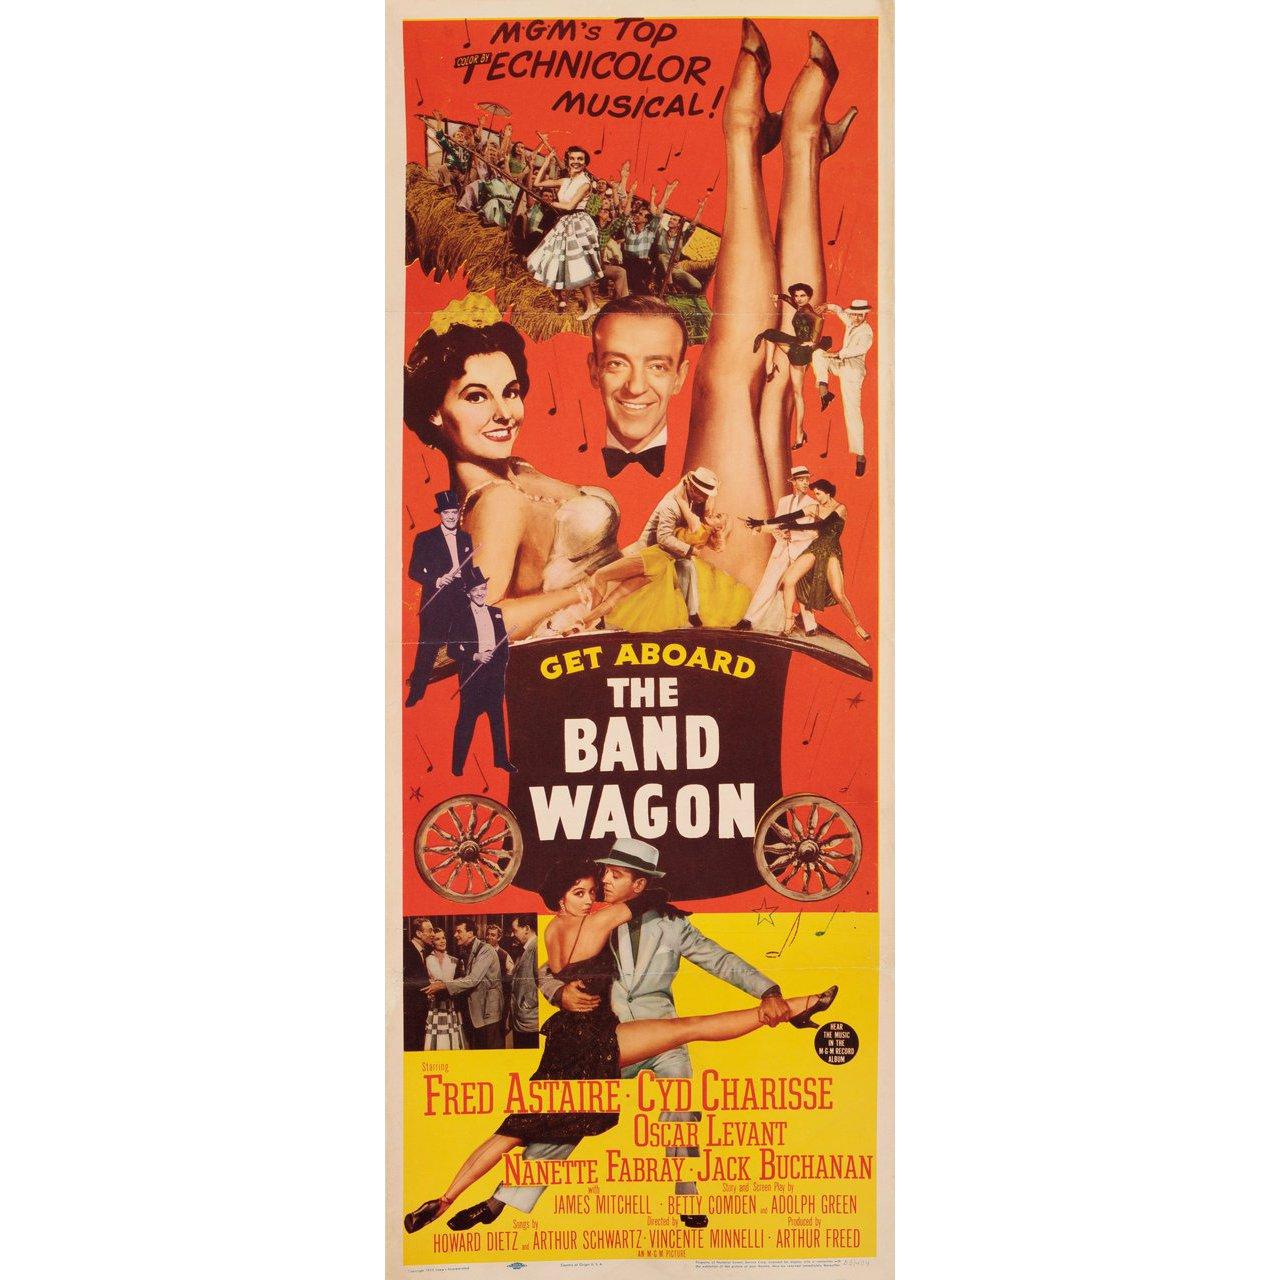 Original 1953 U.S. insert poster for the film The Band Wagon directed by Vincente Minnelli with Fred Astaire / Cyd Charisse / Oscar Levant / Nanette Fabray. Fine condition, linen-backed with slight trim at bottom. This poster has been professionally